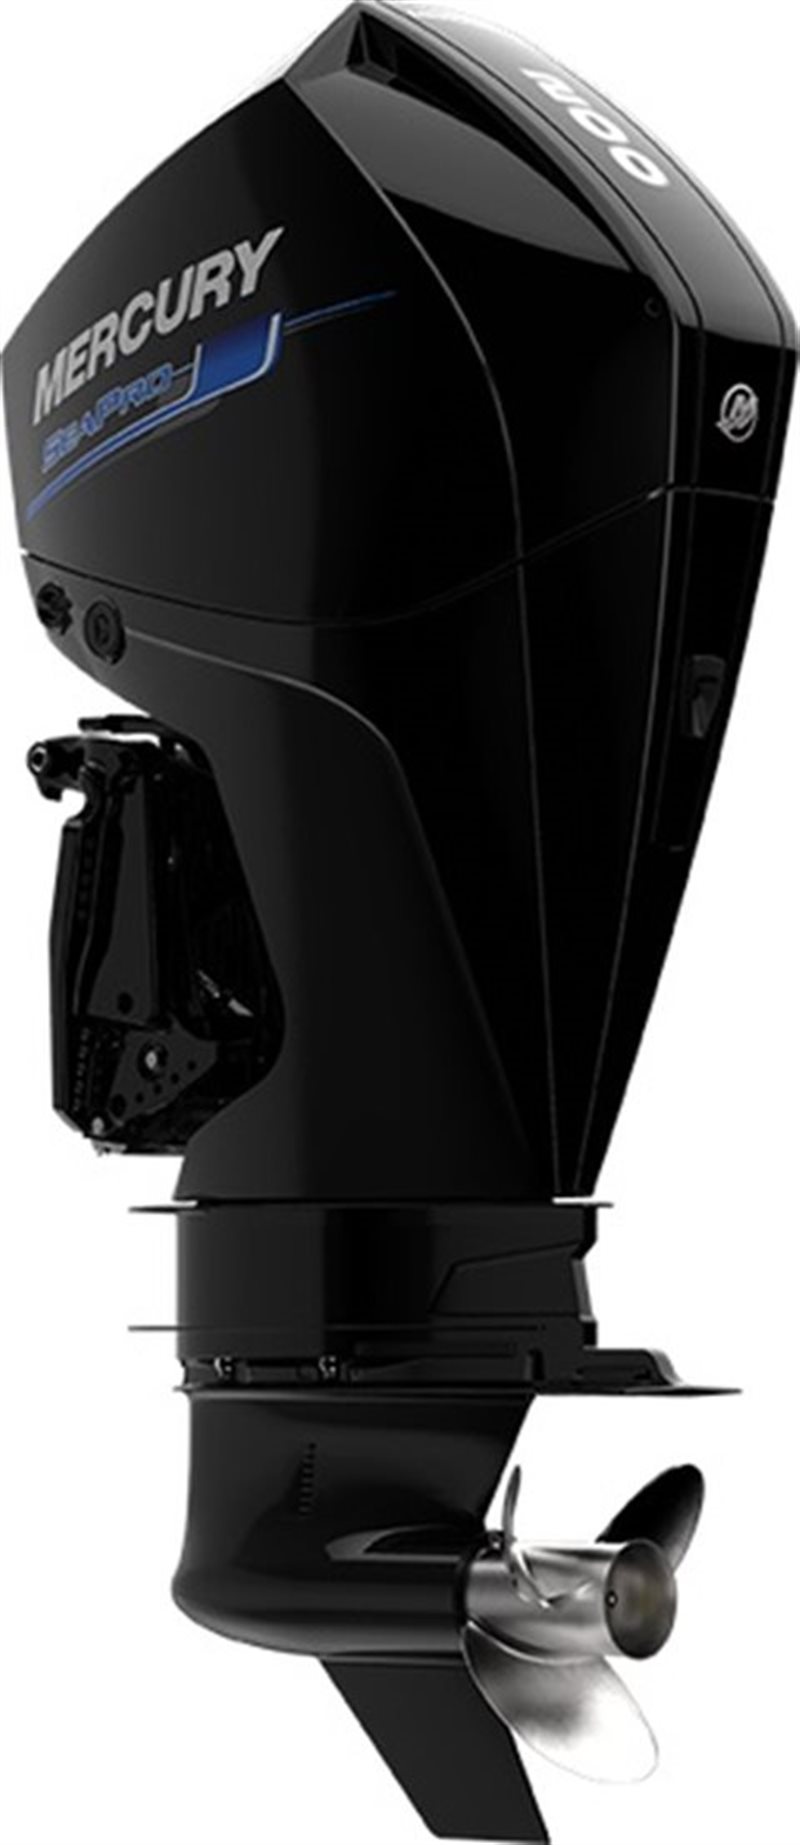 2021 Mercury Outboard SeaPro 200 - 300 at Fort Fremont Marine